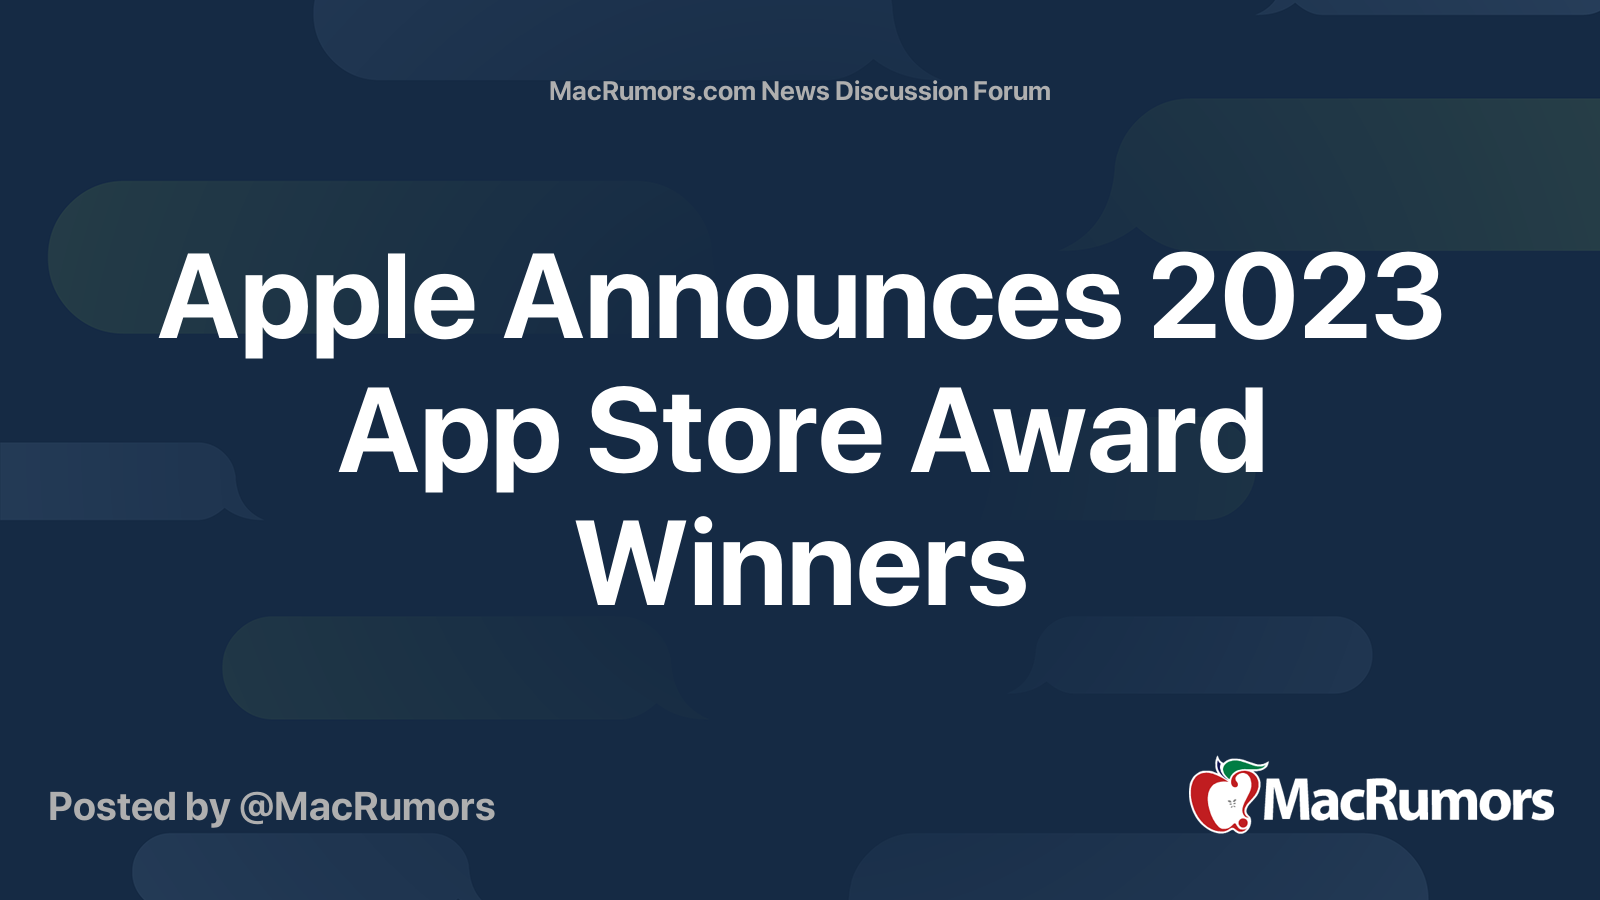 Apple unveils App Store Award winners, the best apps and games of 2023 -  Apple